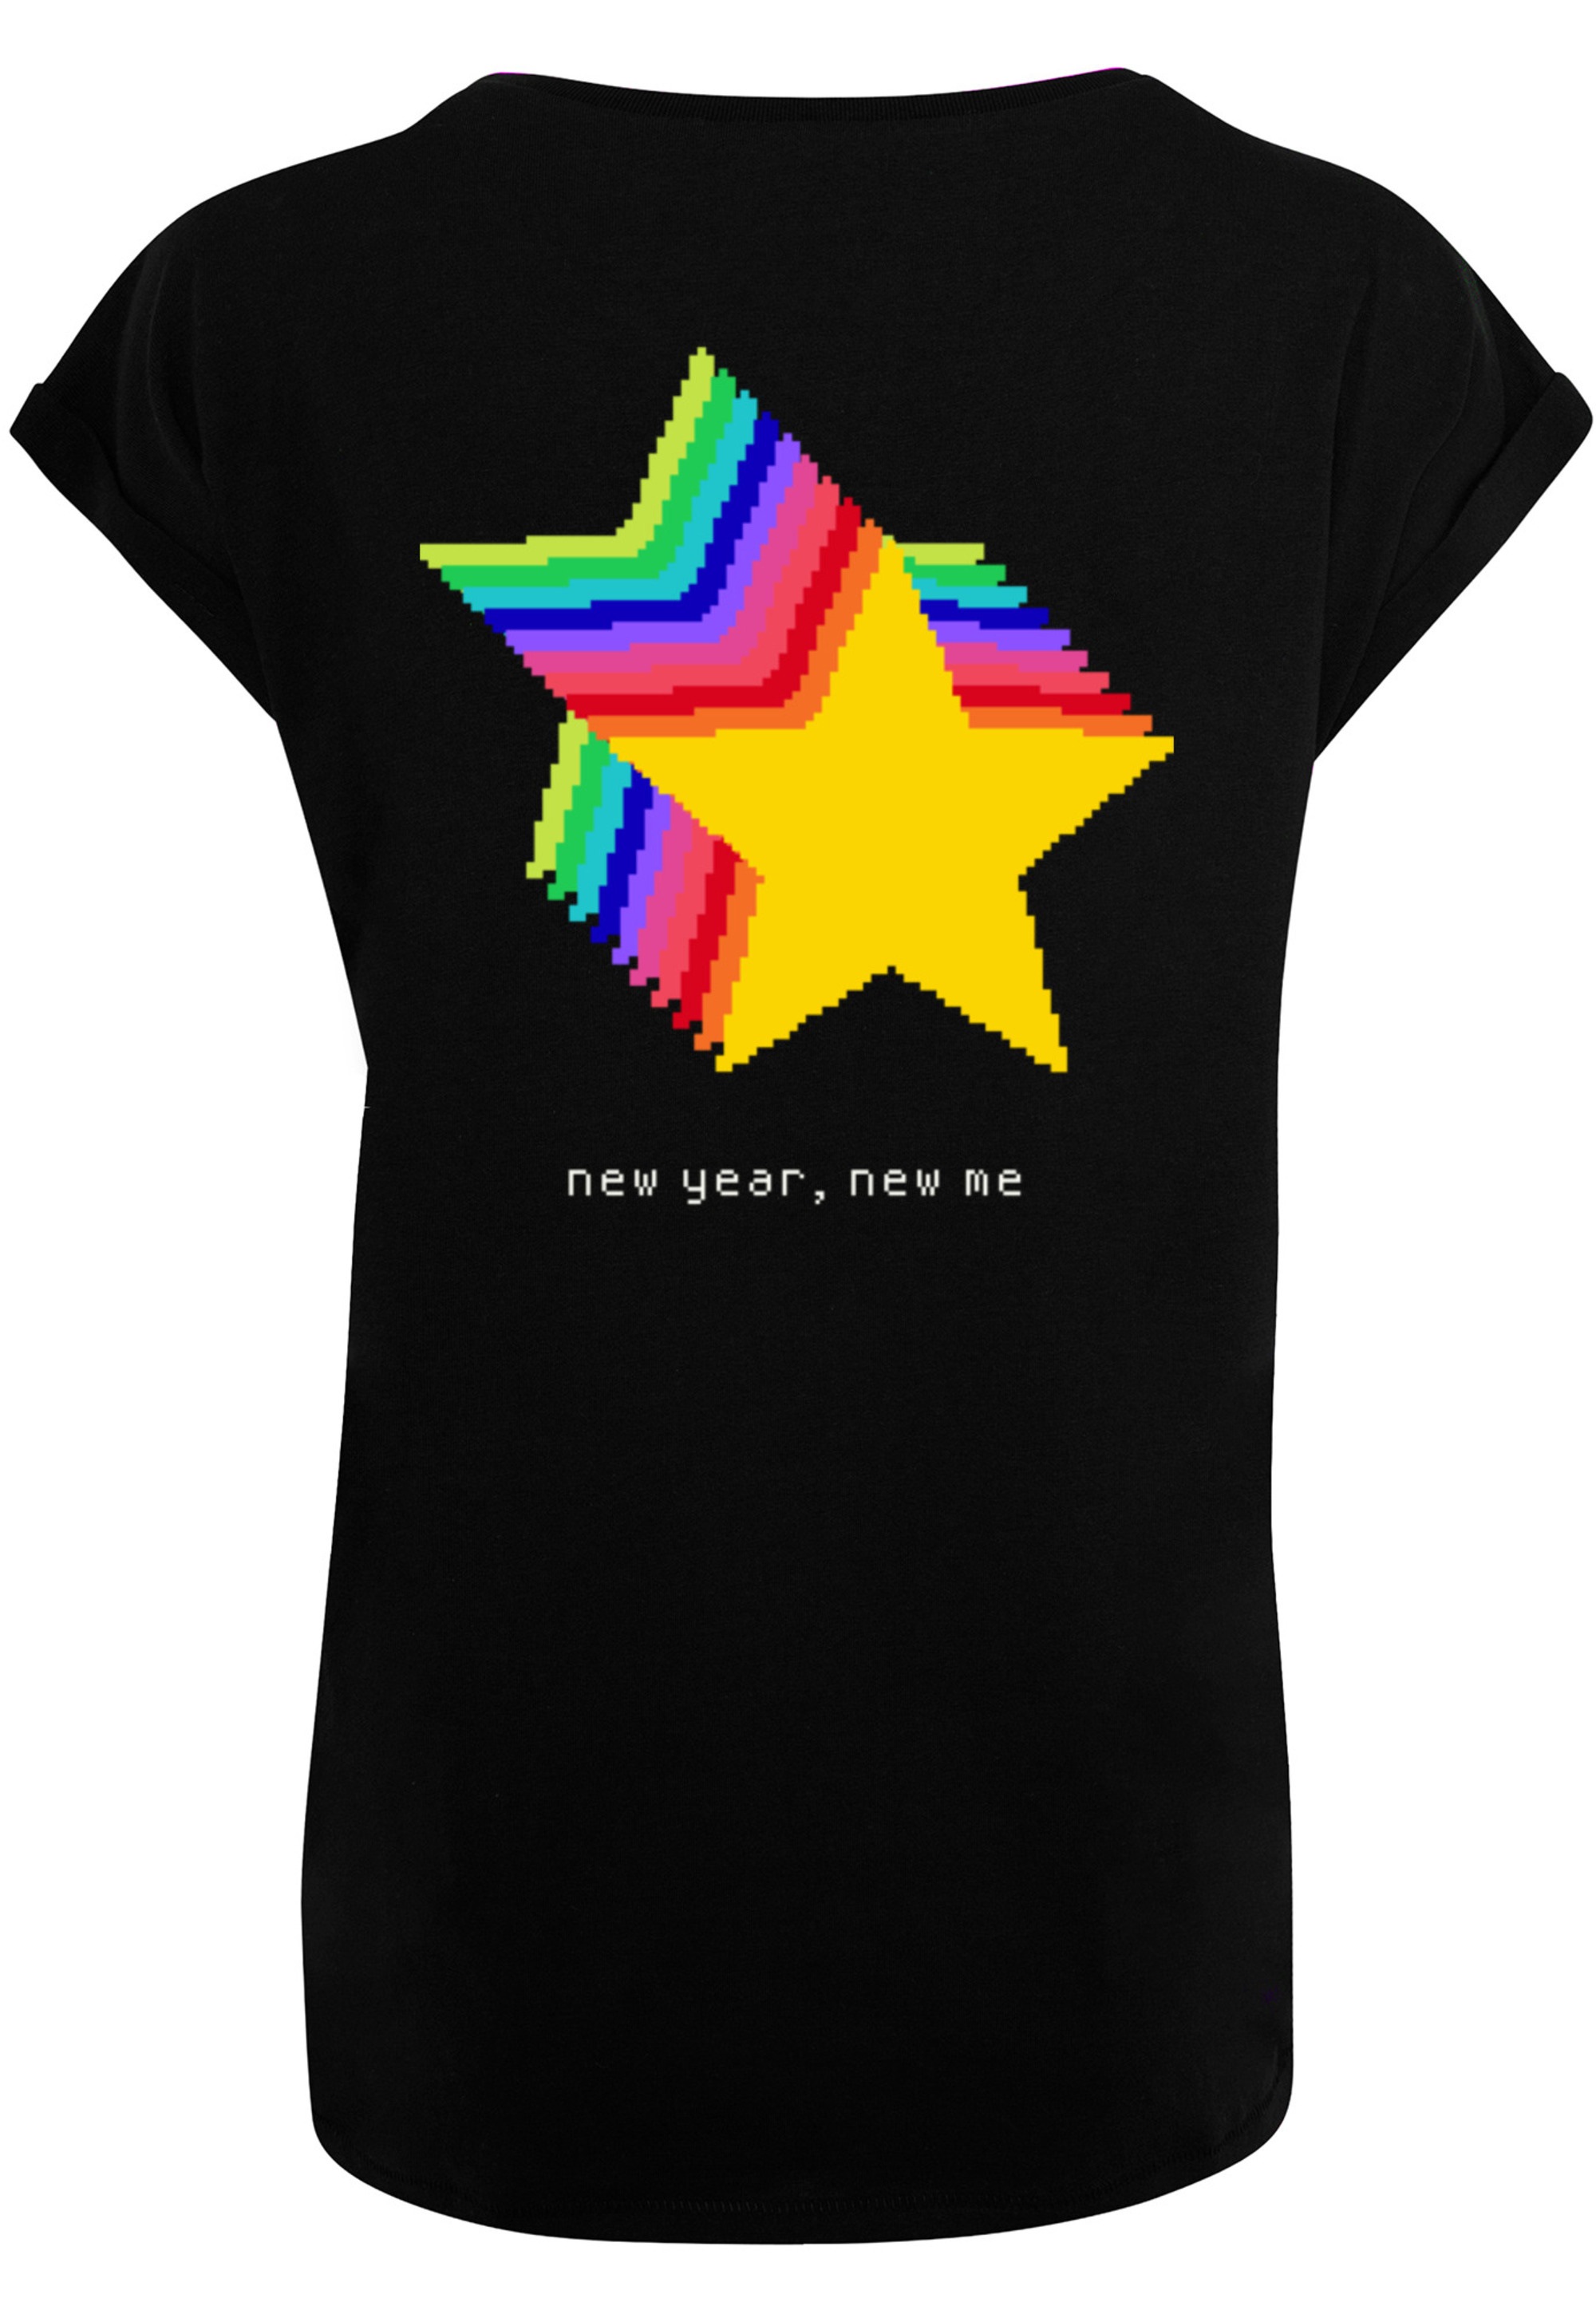 Print | Party T-Shirt Happy online F4NT4STIC People Only«, I\'m walking »SIlvester